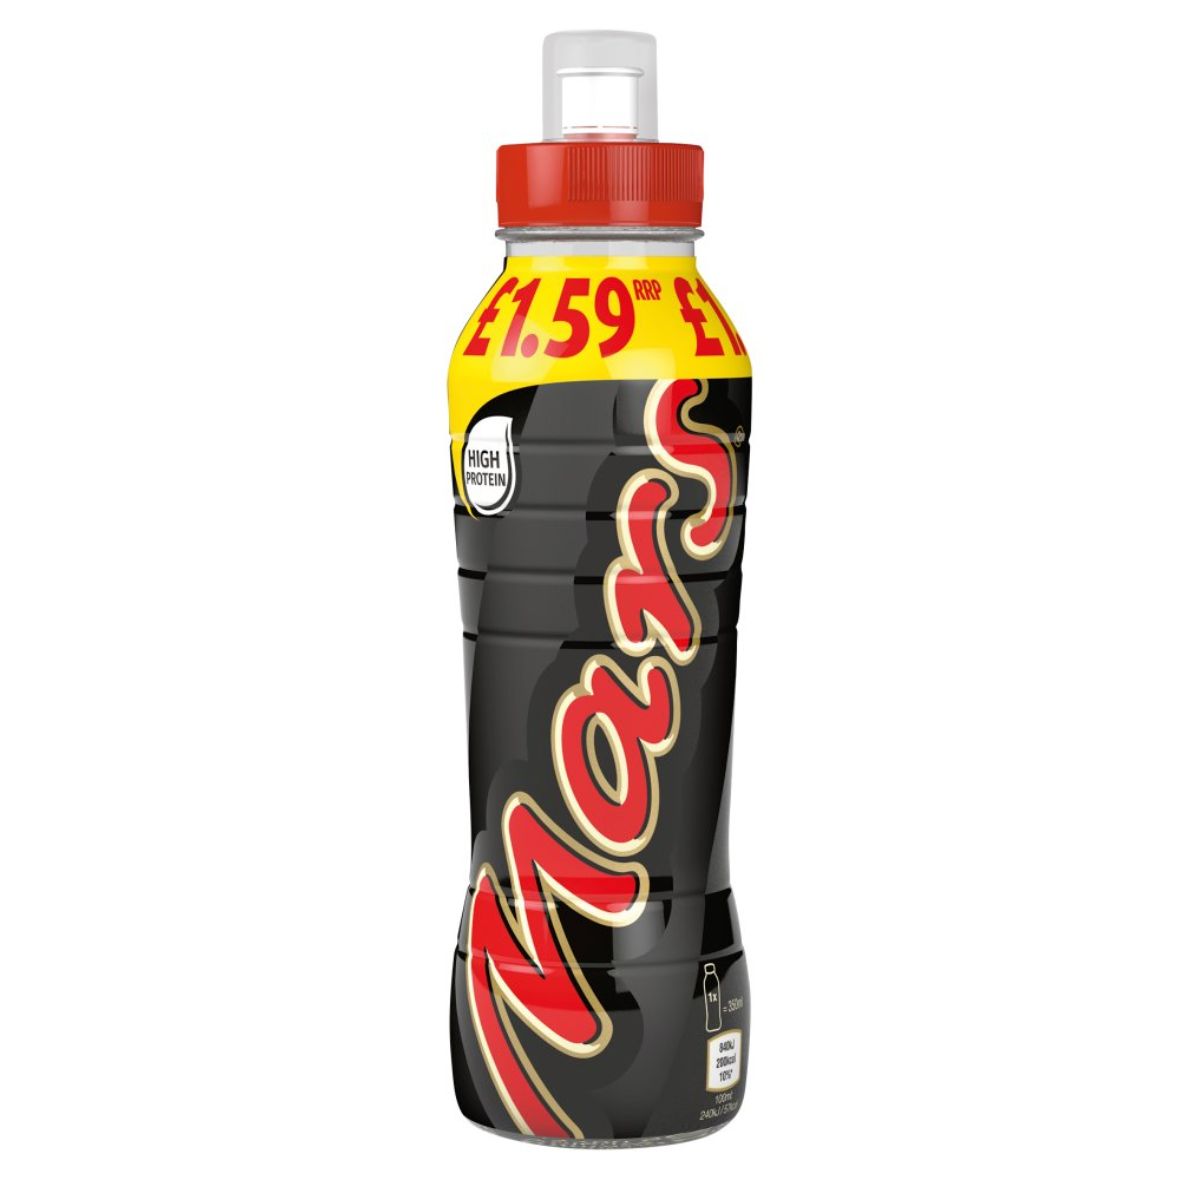 A bottle of Mars - Chocolate Milk Shake Drink - 350ml on a white background.